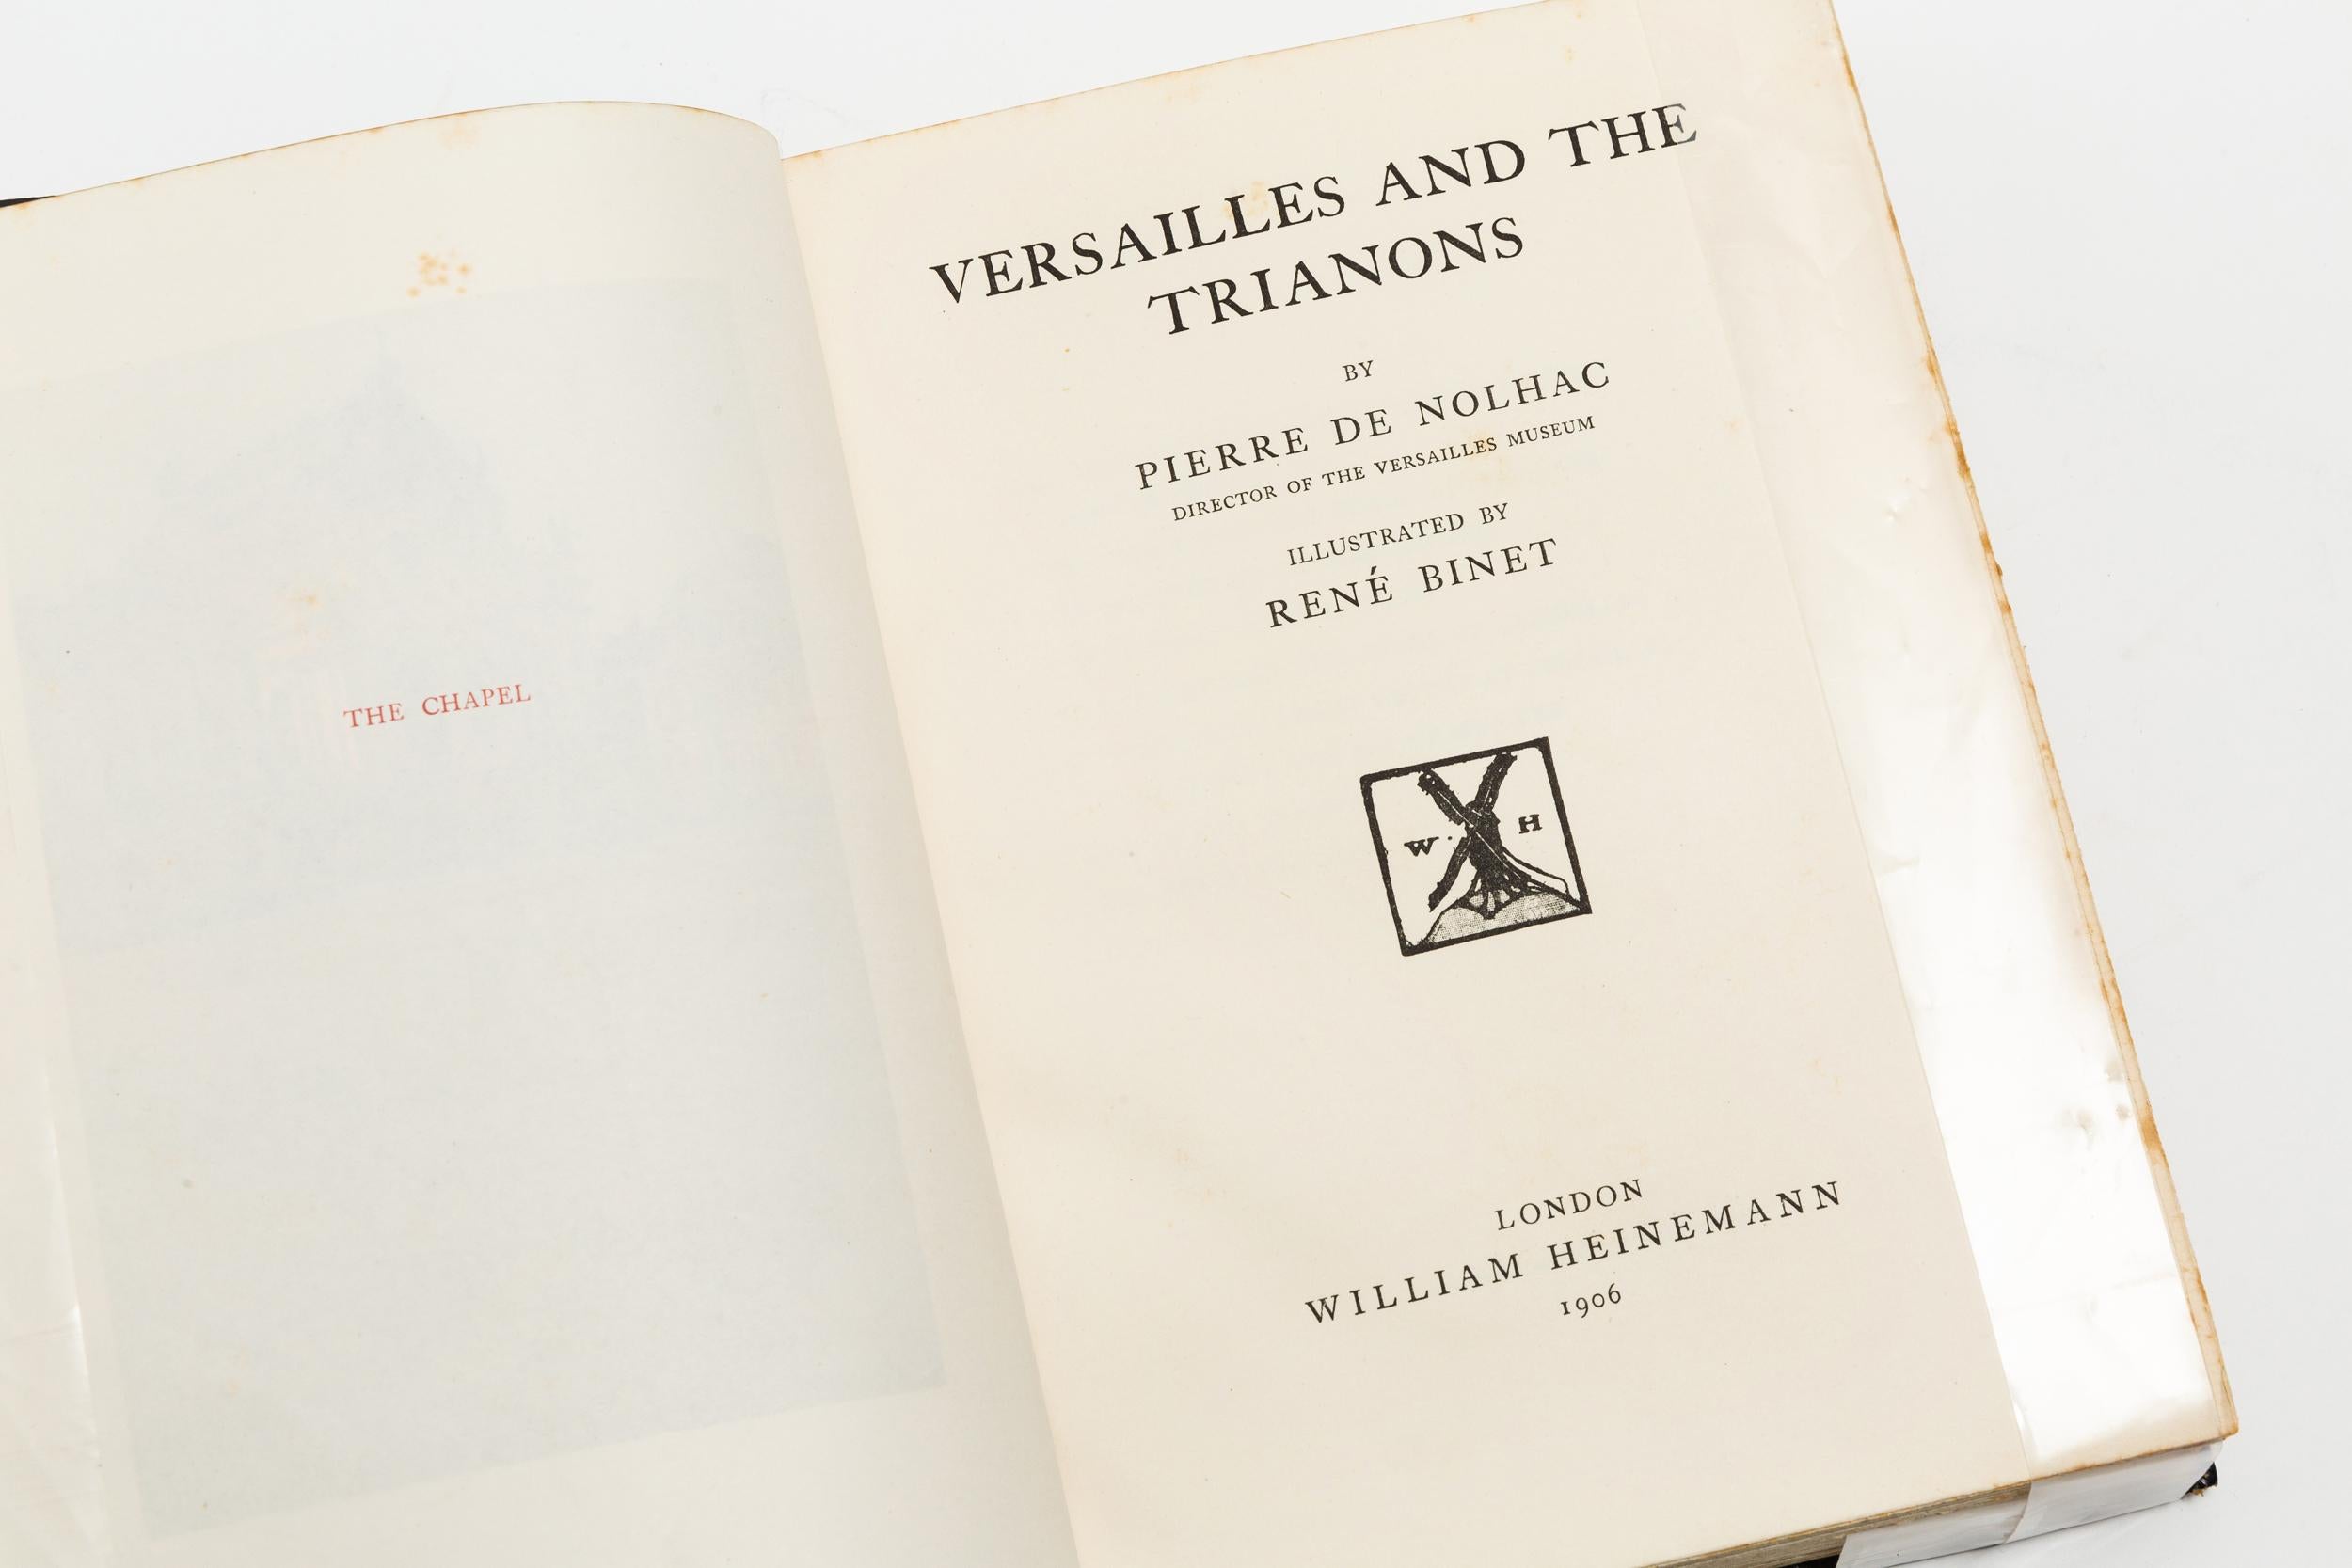 English 1 Volume, Pierre DeNolhac, Versailles and The Trianons